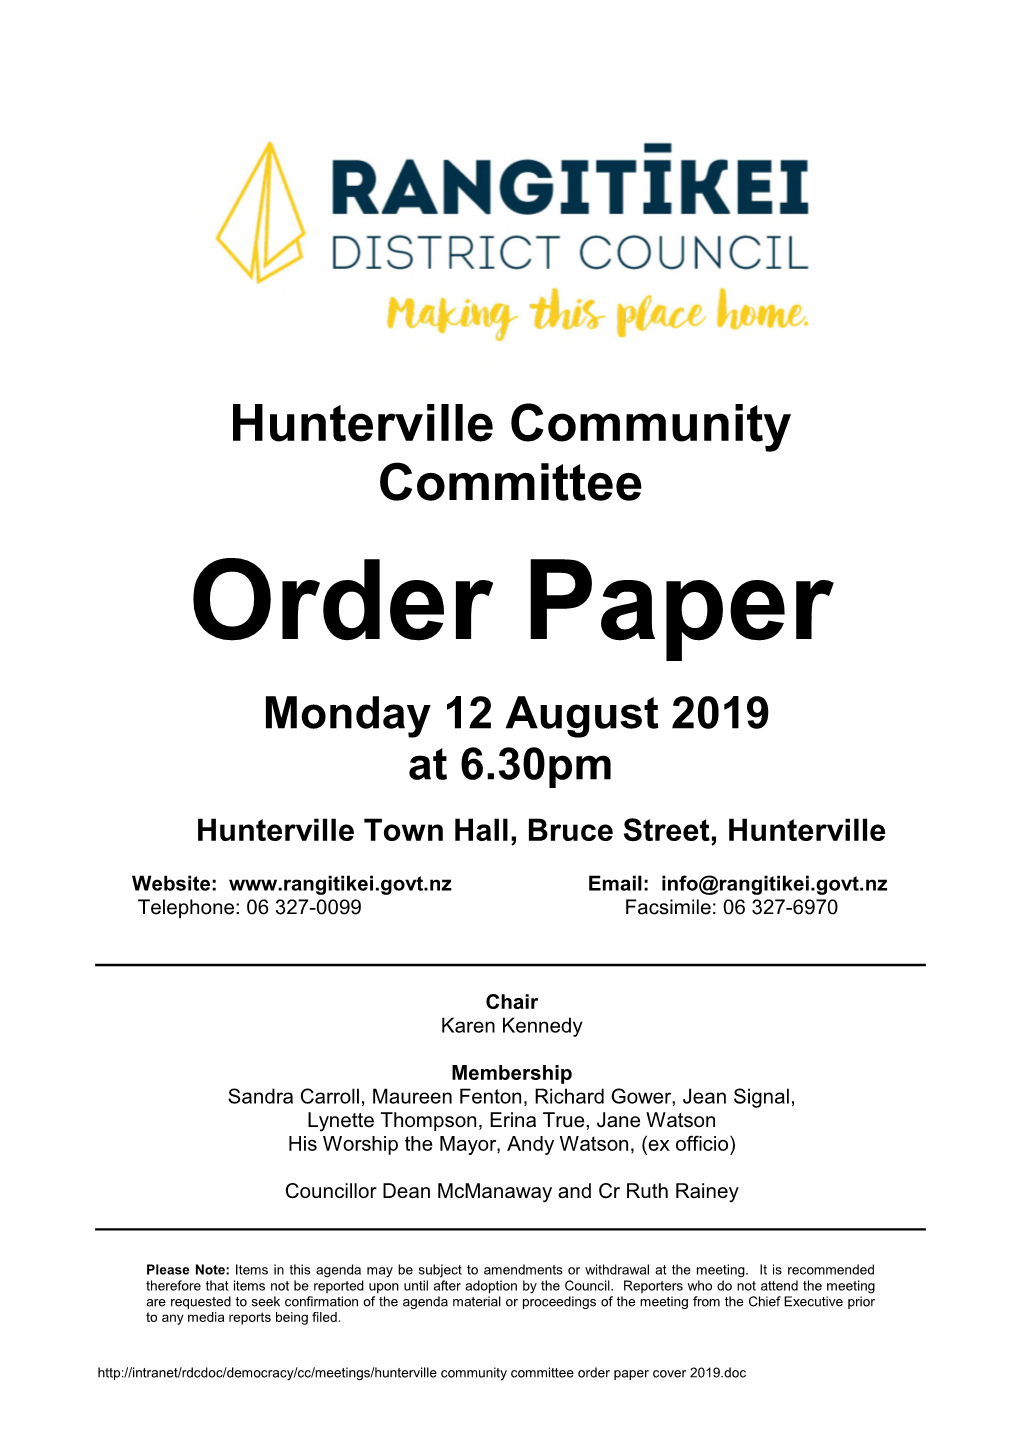 Order Paper Monday 12 August 2019 at 6.30Pm Hunterville Town Hall, Bruce Street, Hunterville